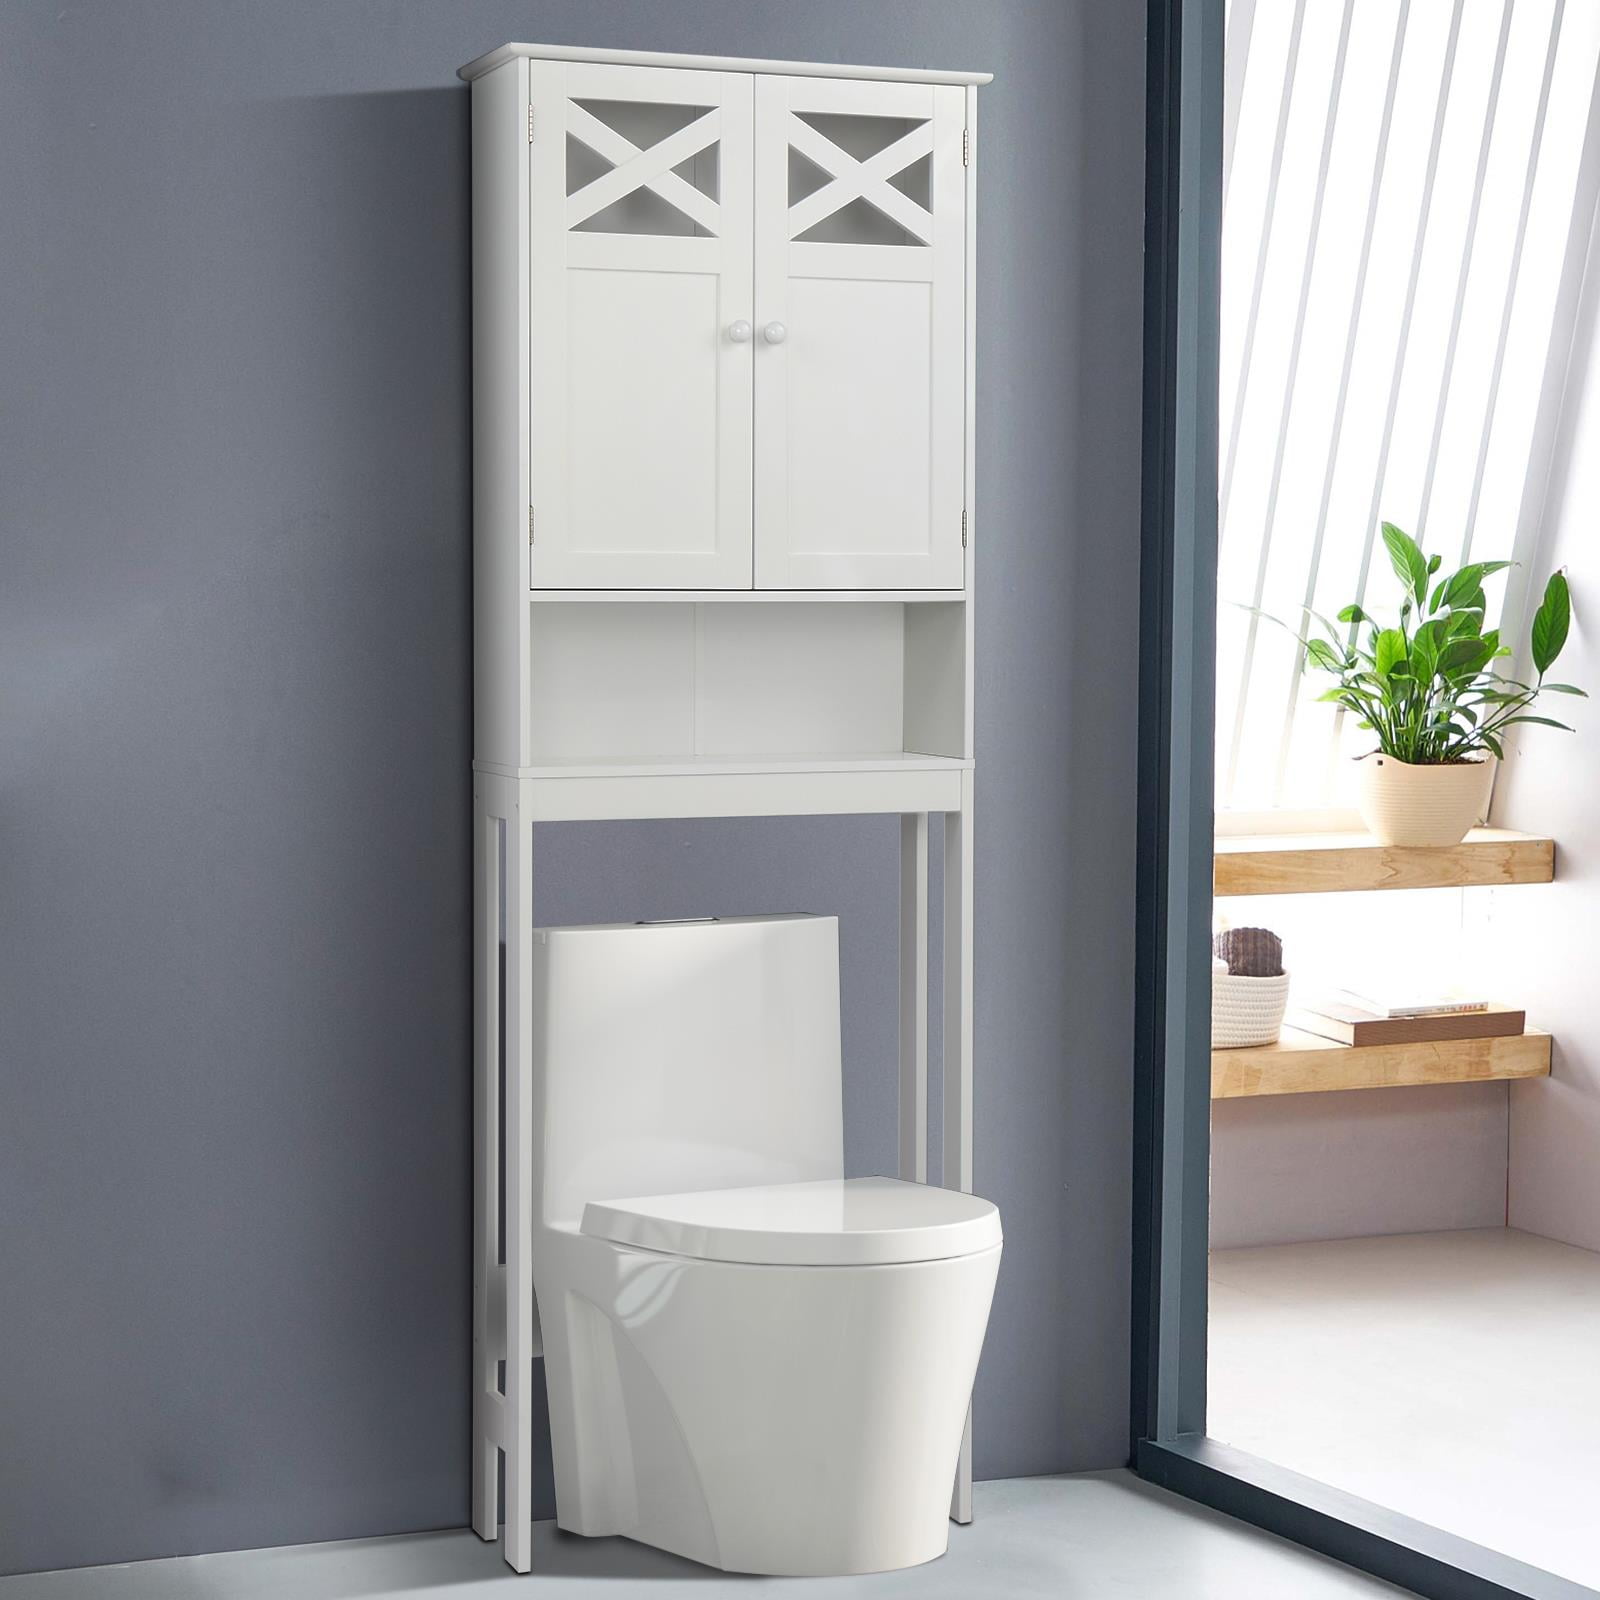 ZZQXTC Over The Toilet Storage, Bathroom Organizer Above Toilet, Wood Metal  Bathroom Space Saver Stand Behind Toilet, Storage Cabinet with Doors and